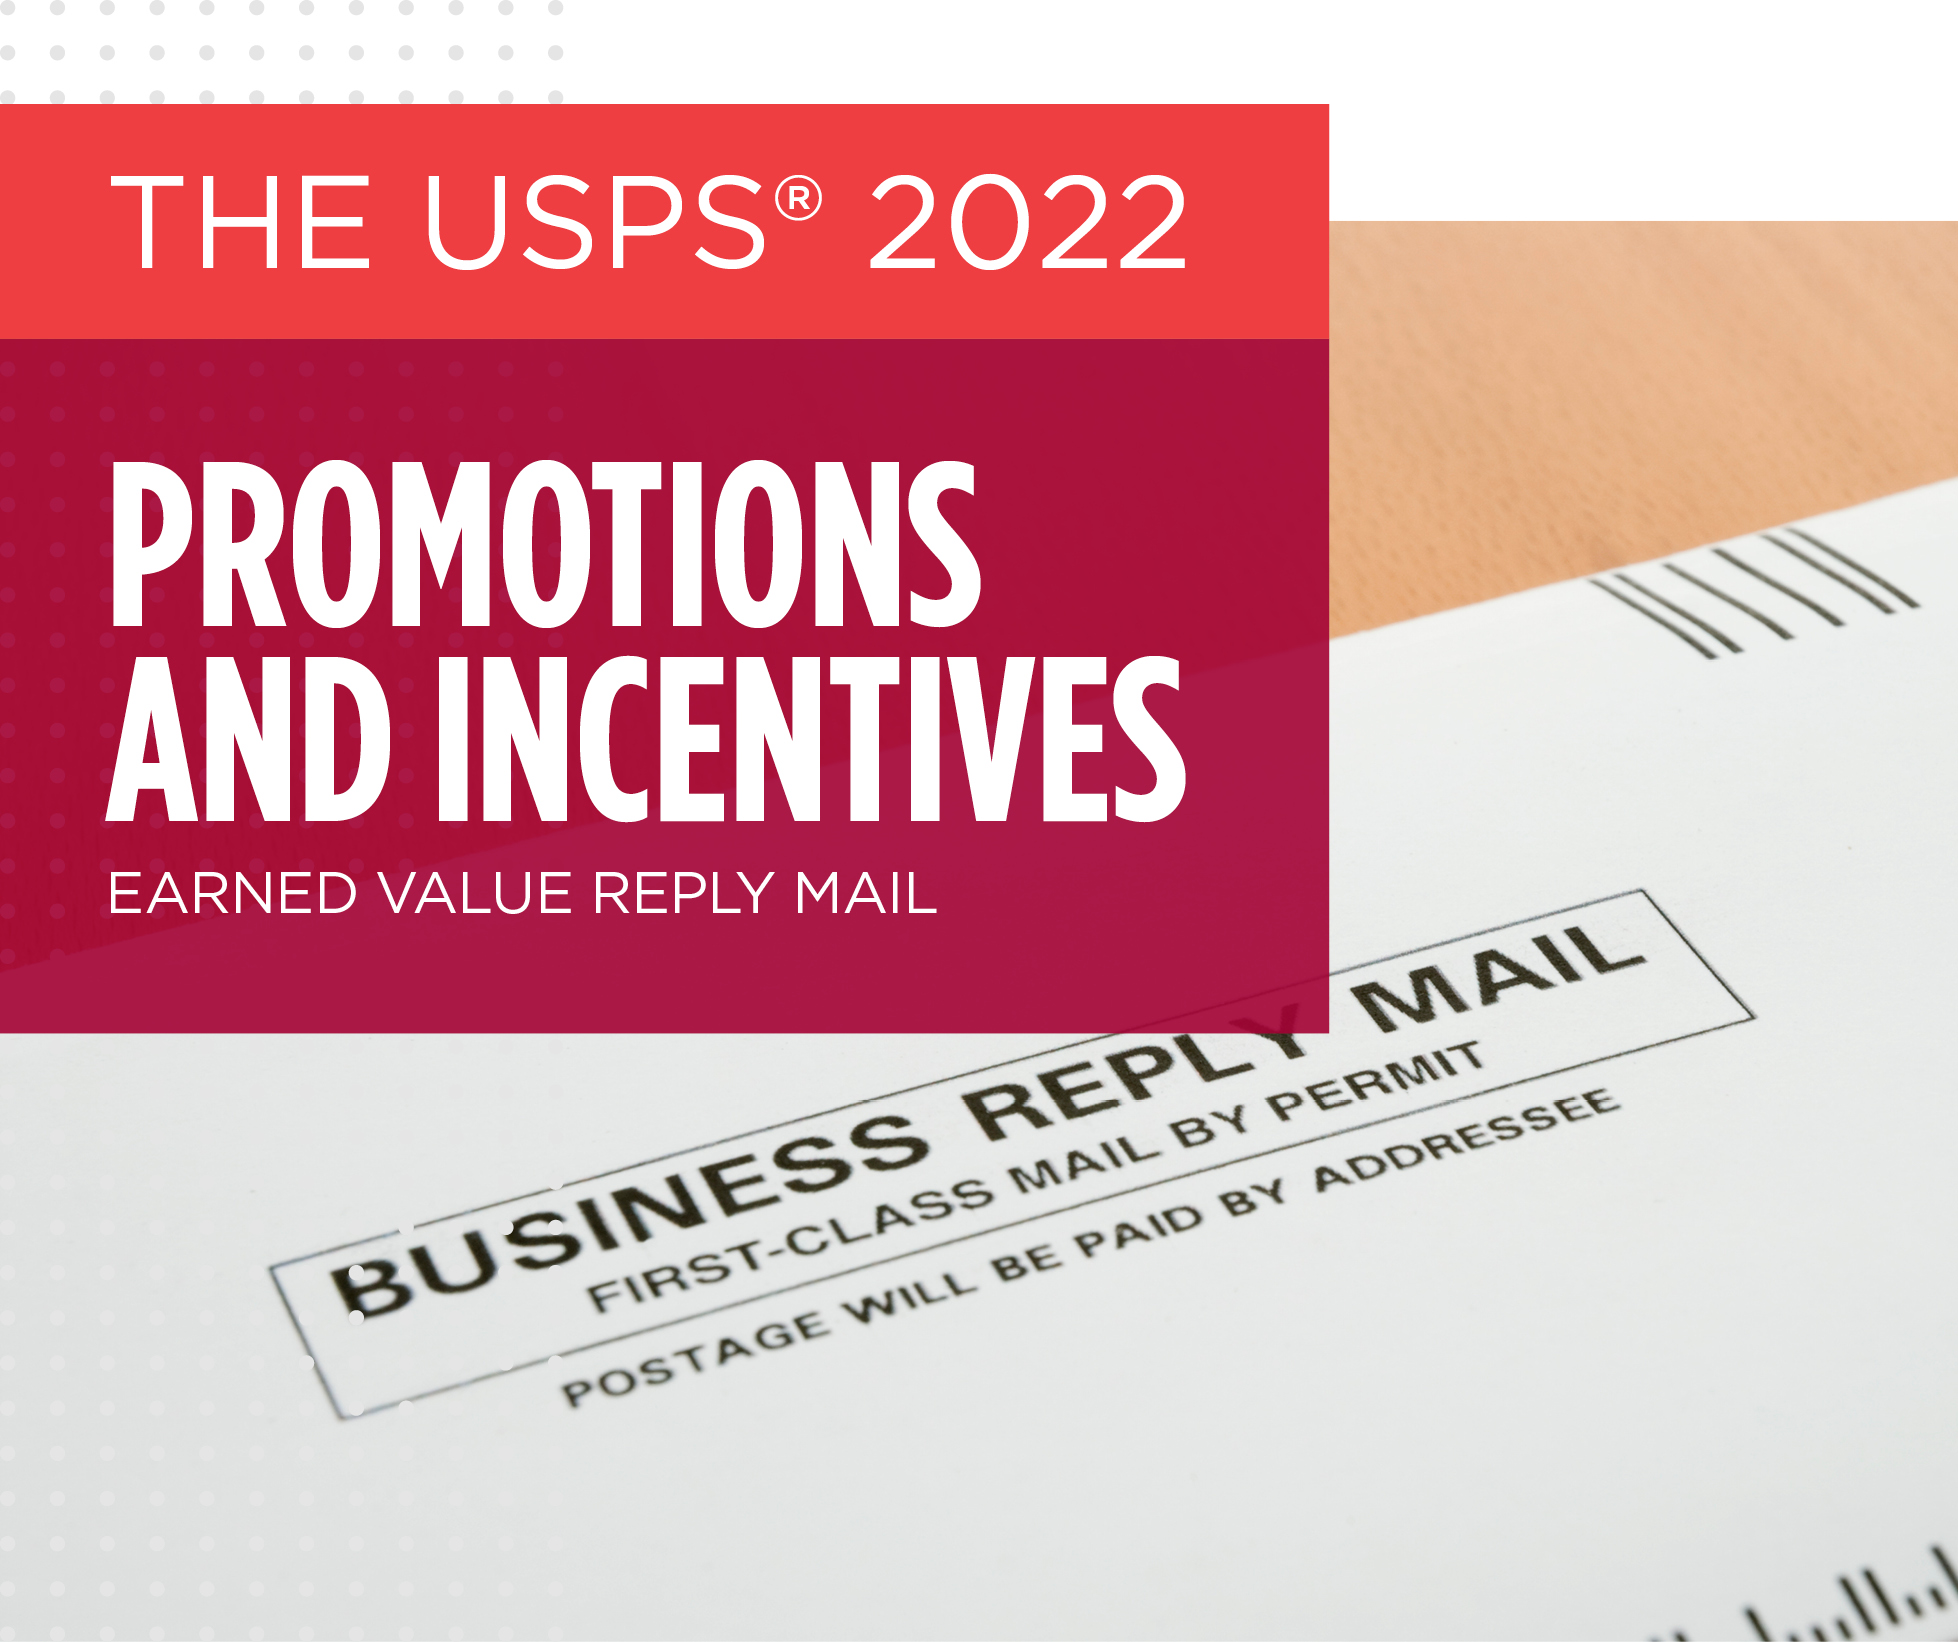 USPS 2022 Earned Value Reply Mail Promotion